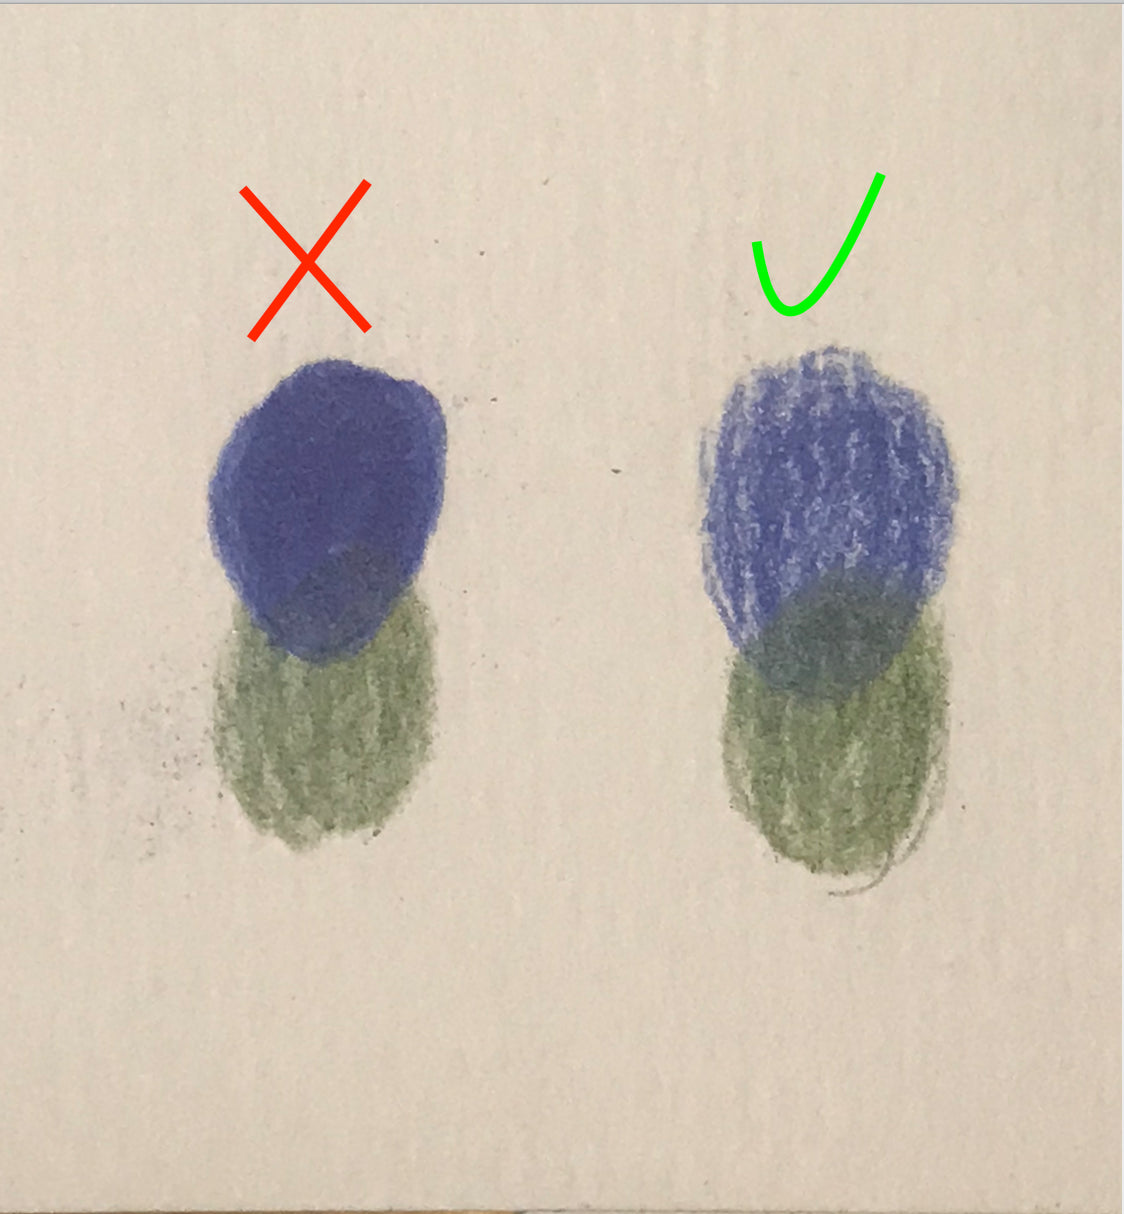 7 Colored Pencil Mistakes You May Be Making - Art-n-Fly